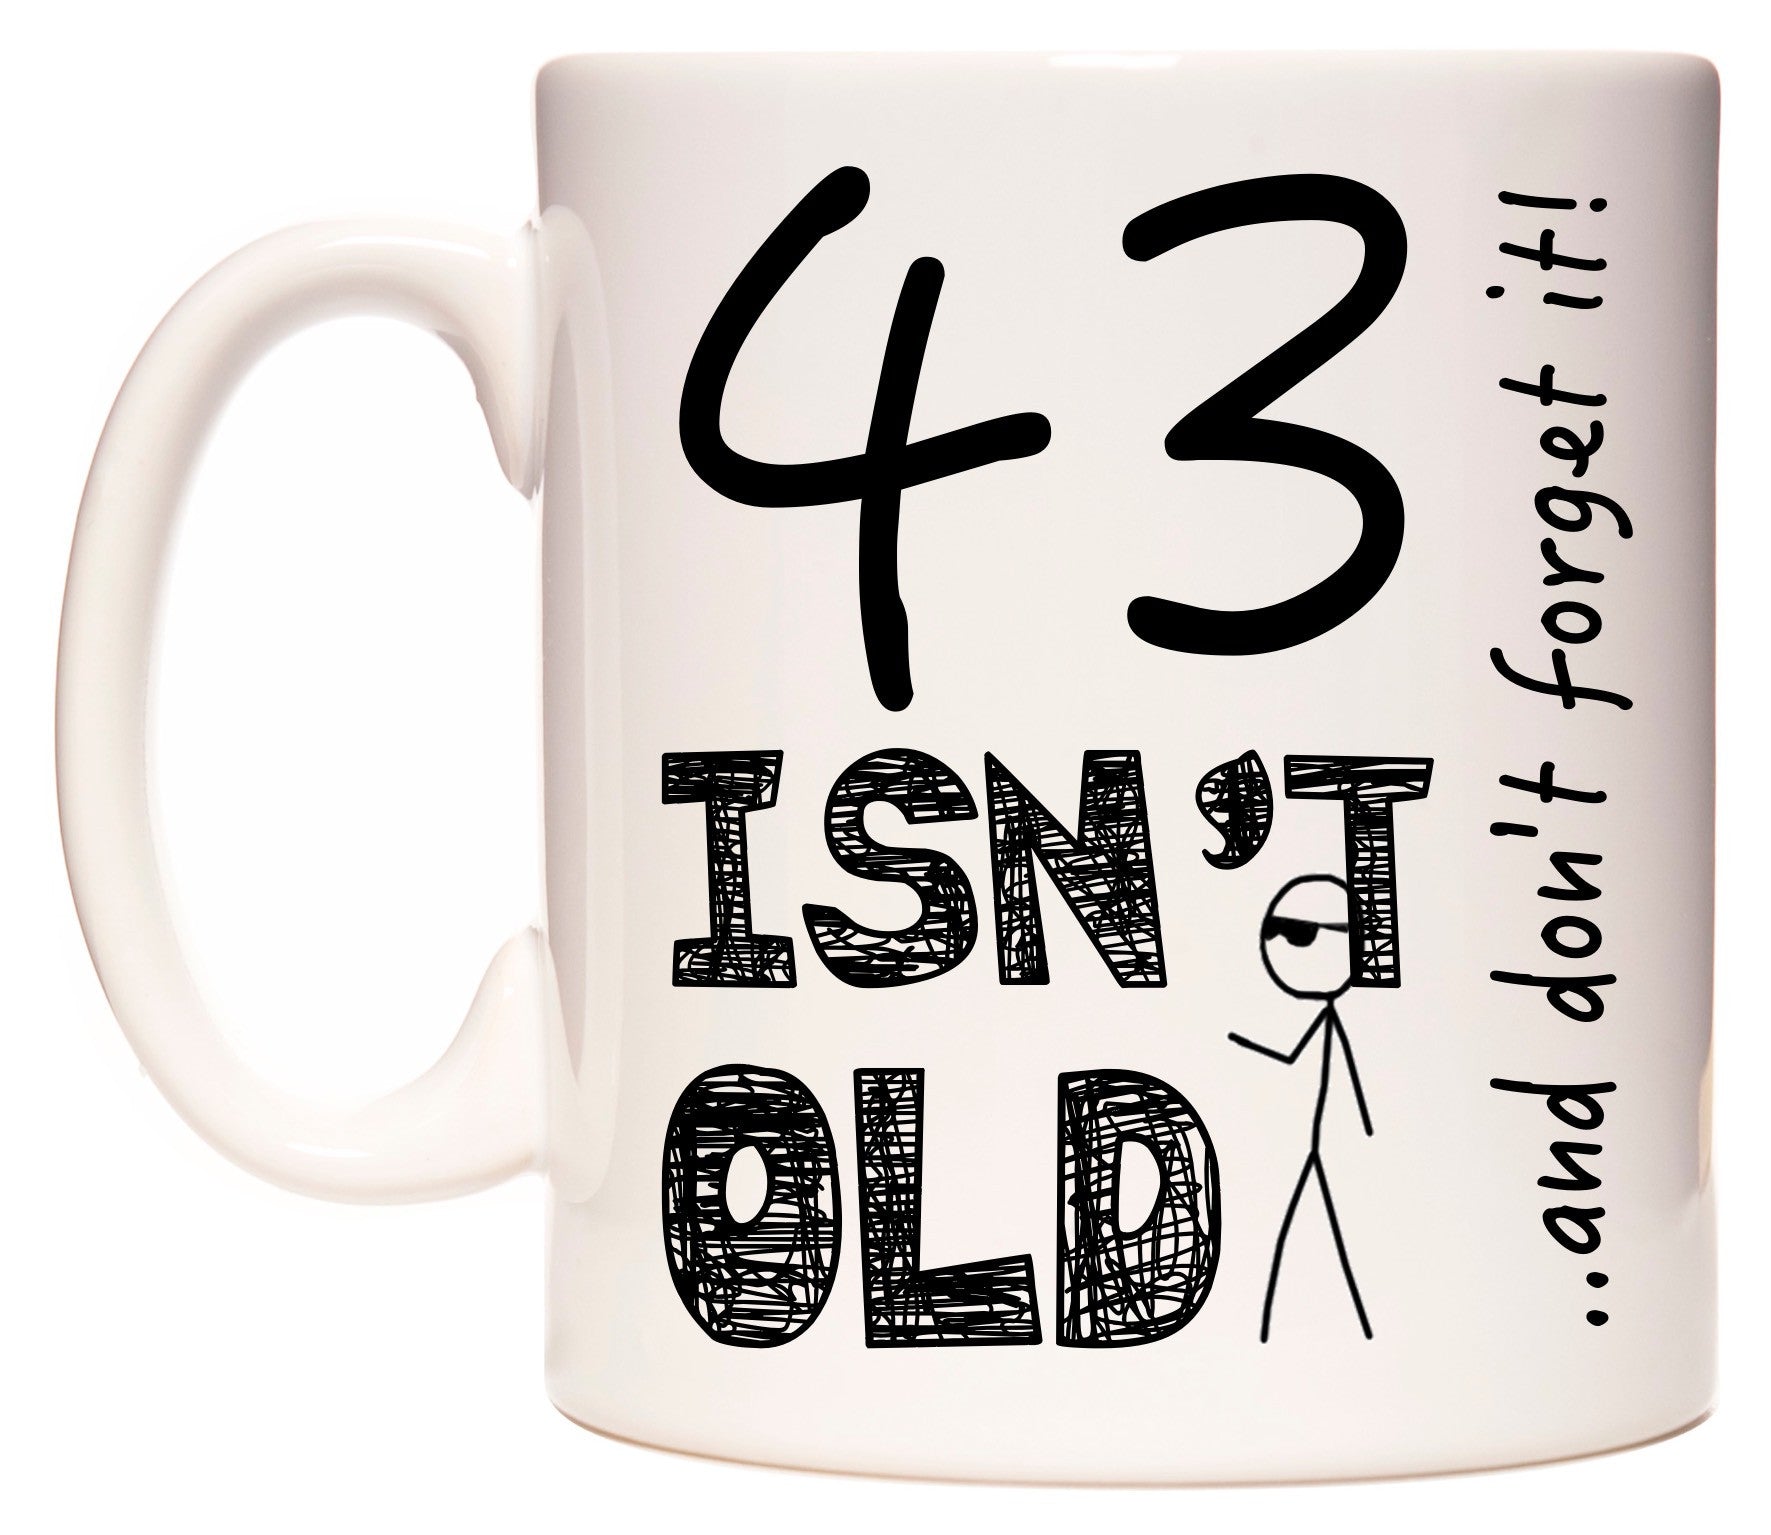 This mug features 43 Isn't Old